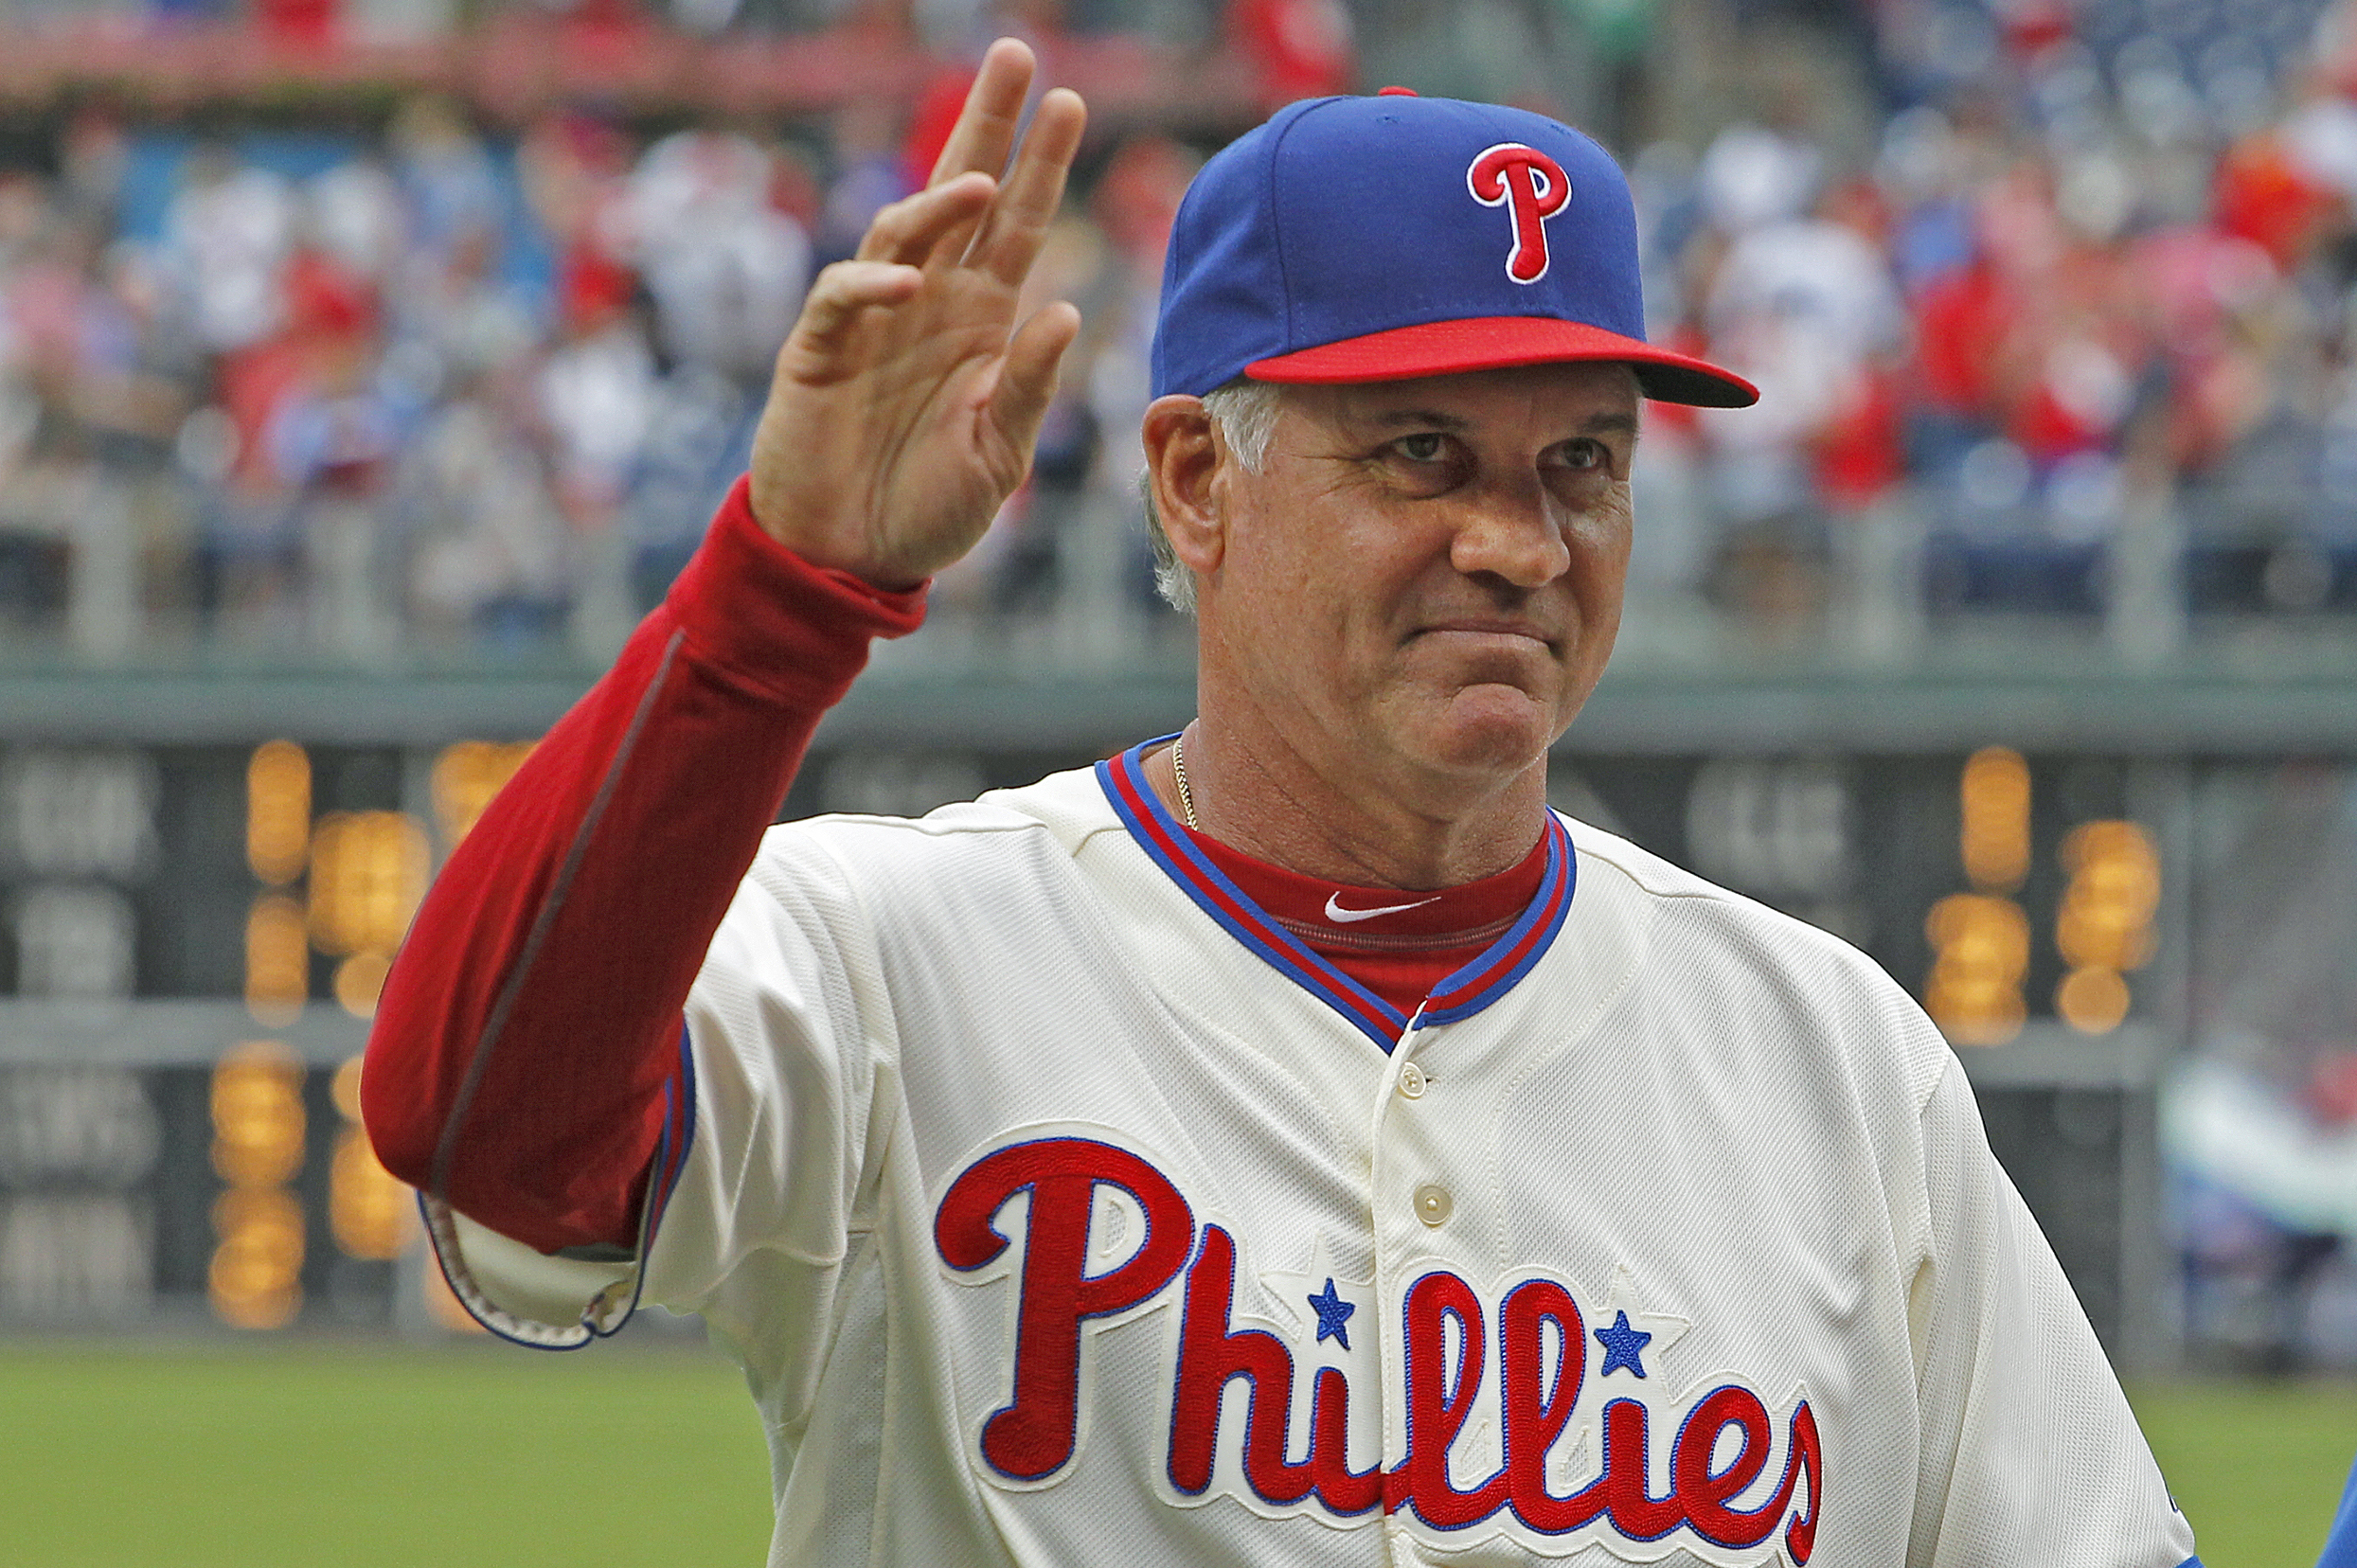 Phillies Manager Ryne Sandberg Receives Standing Ovation in